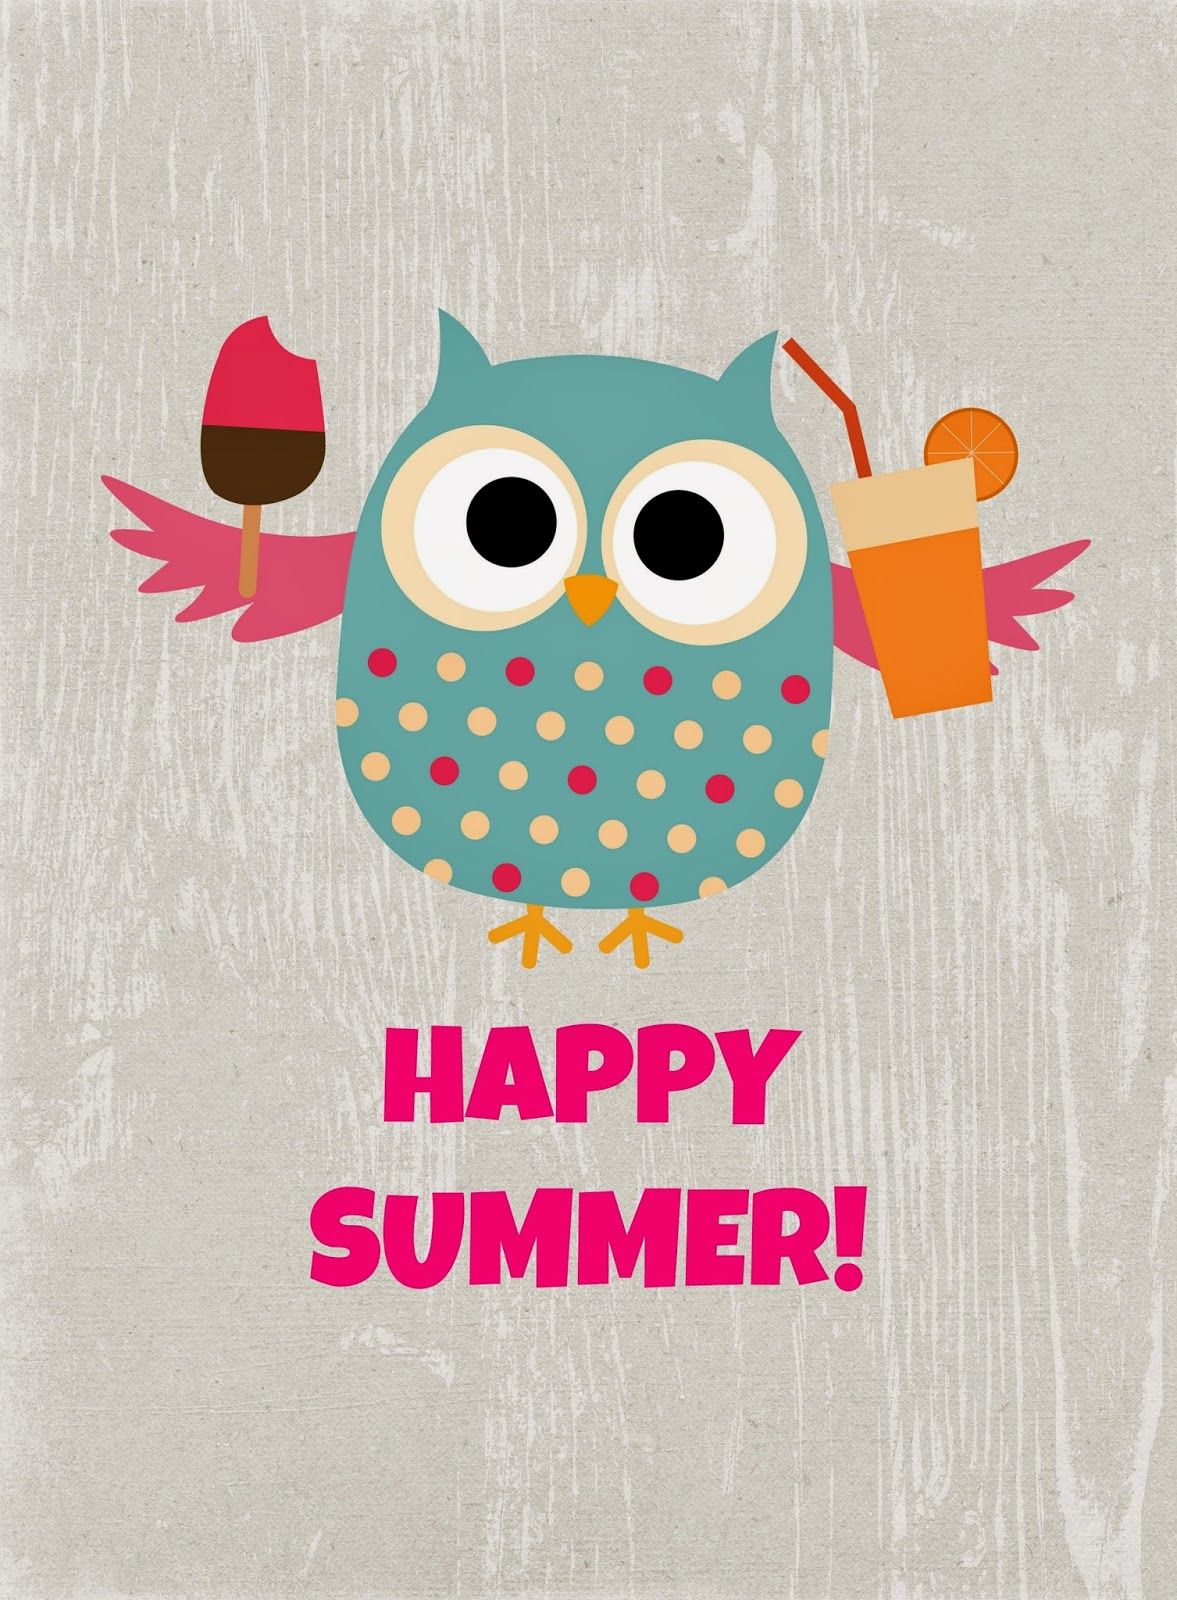 FREE Owl Themed Summer Printables For Instant Decor!. Owl wallpaper, Owl, Happy summer